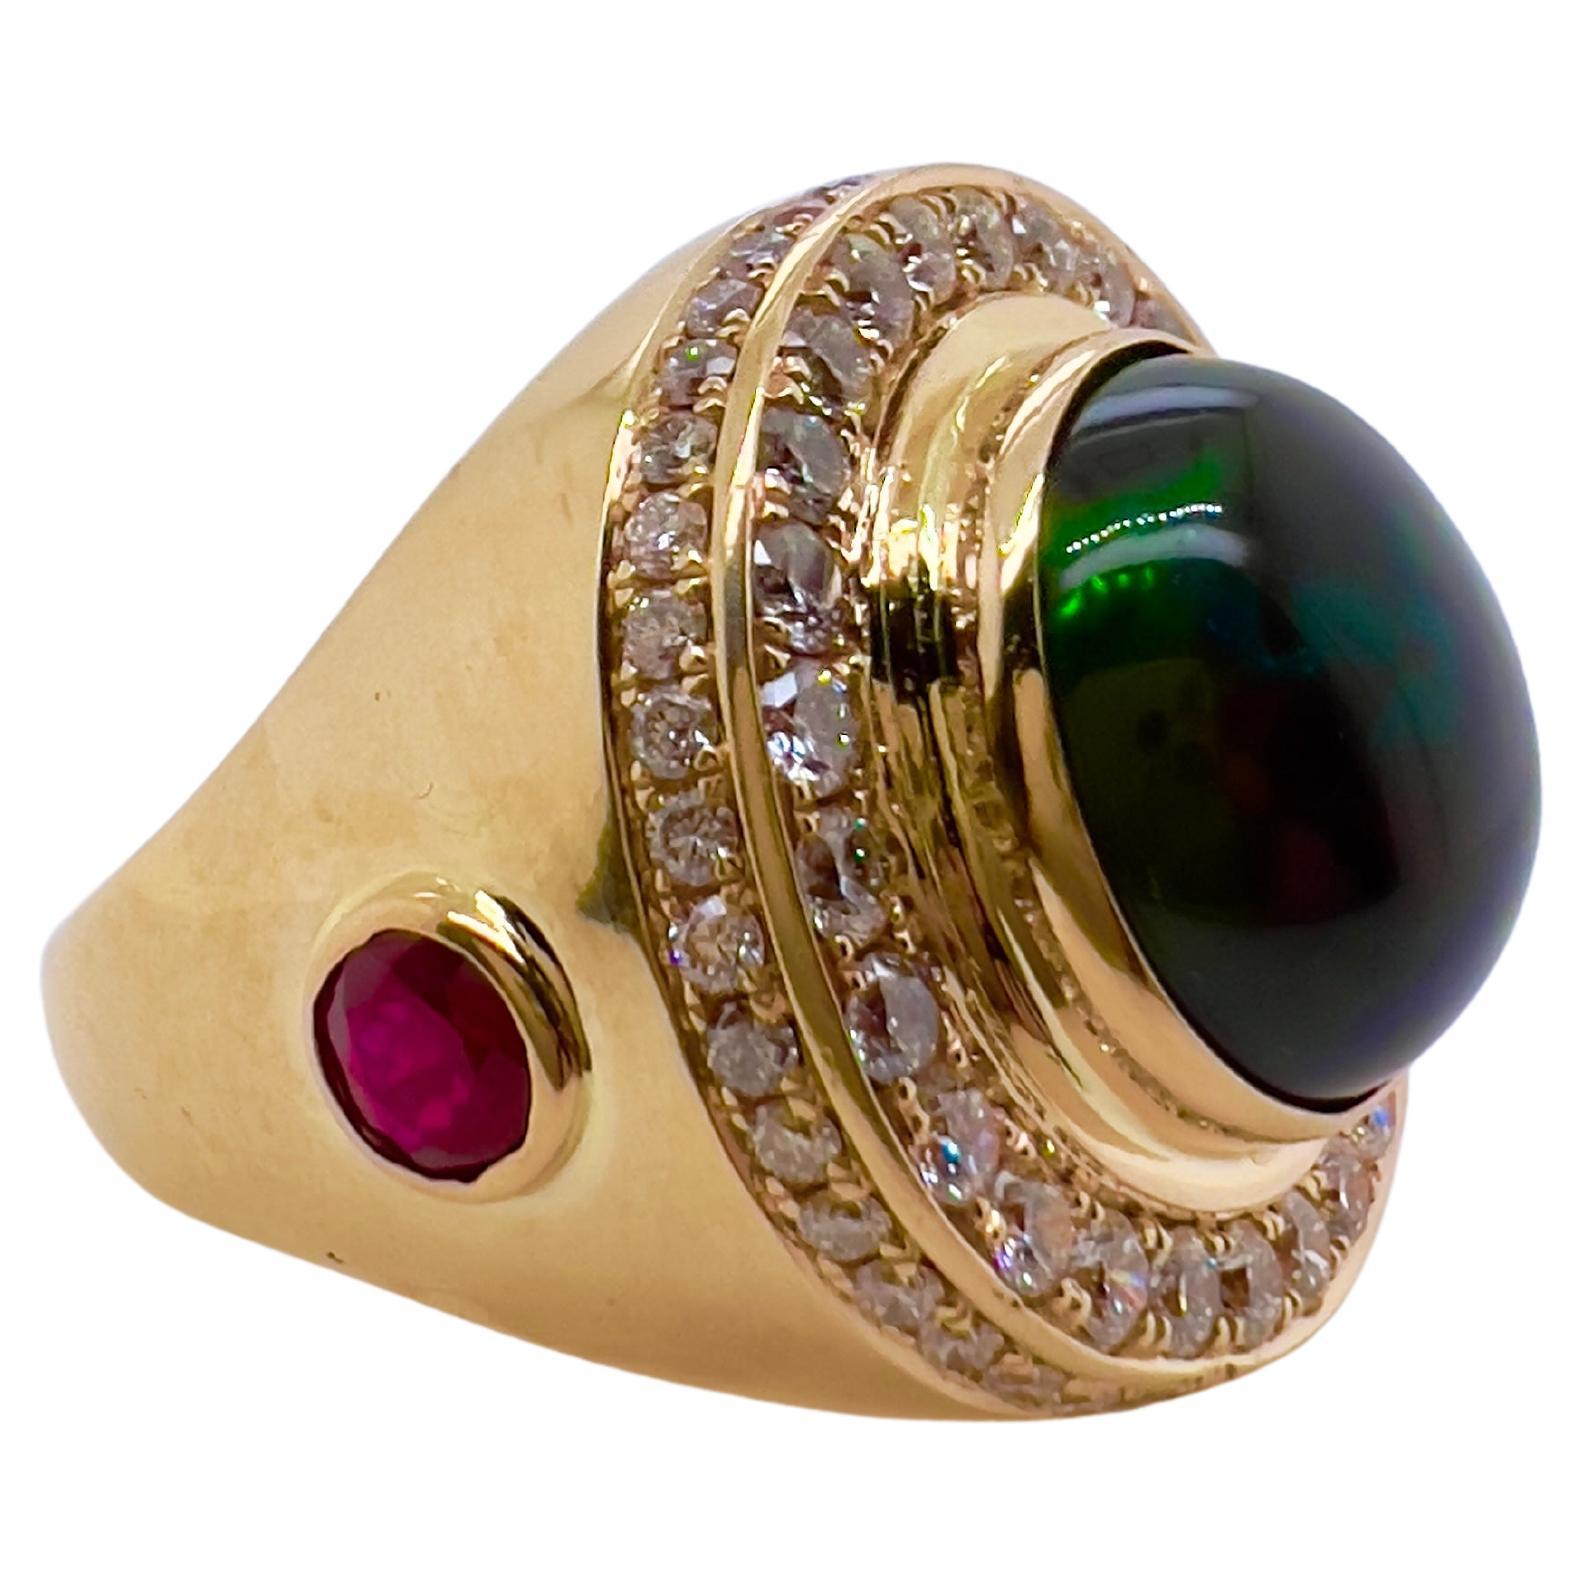 This amazing Black Ethiopian Opal has an amazing colors ranging from green to red to yellow.  The handmade setting is so unique with the two bezel set rubies on the sides that complement the round brilliant diamonds surrounding the opal.  The under